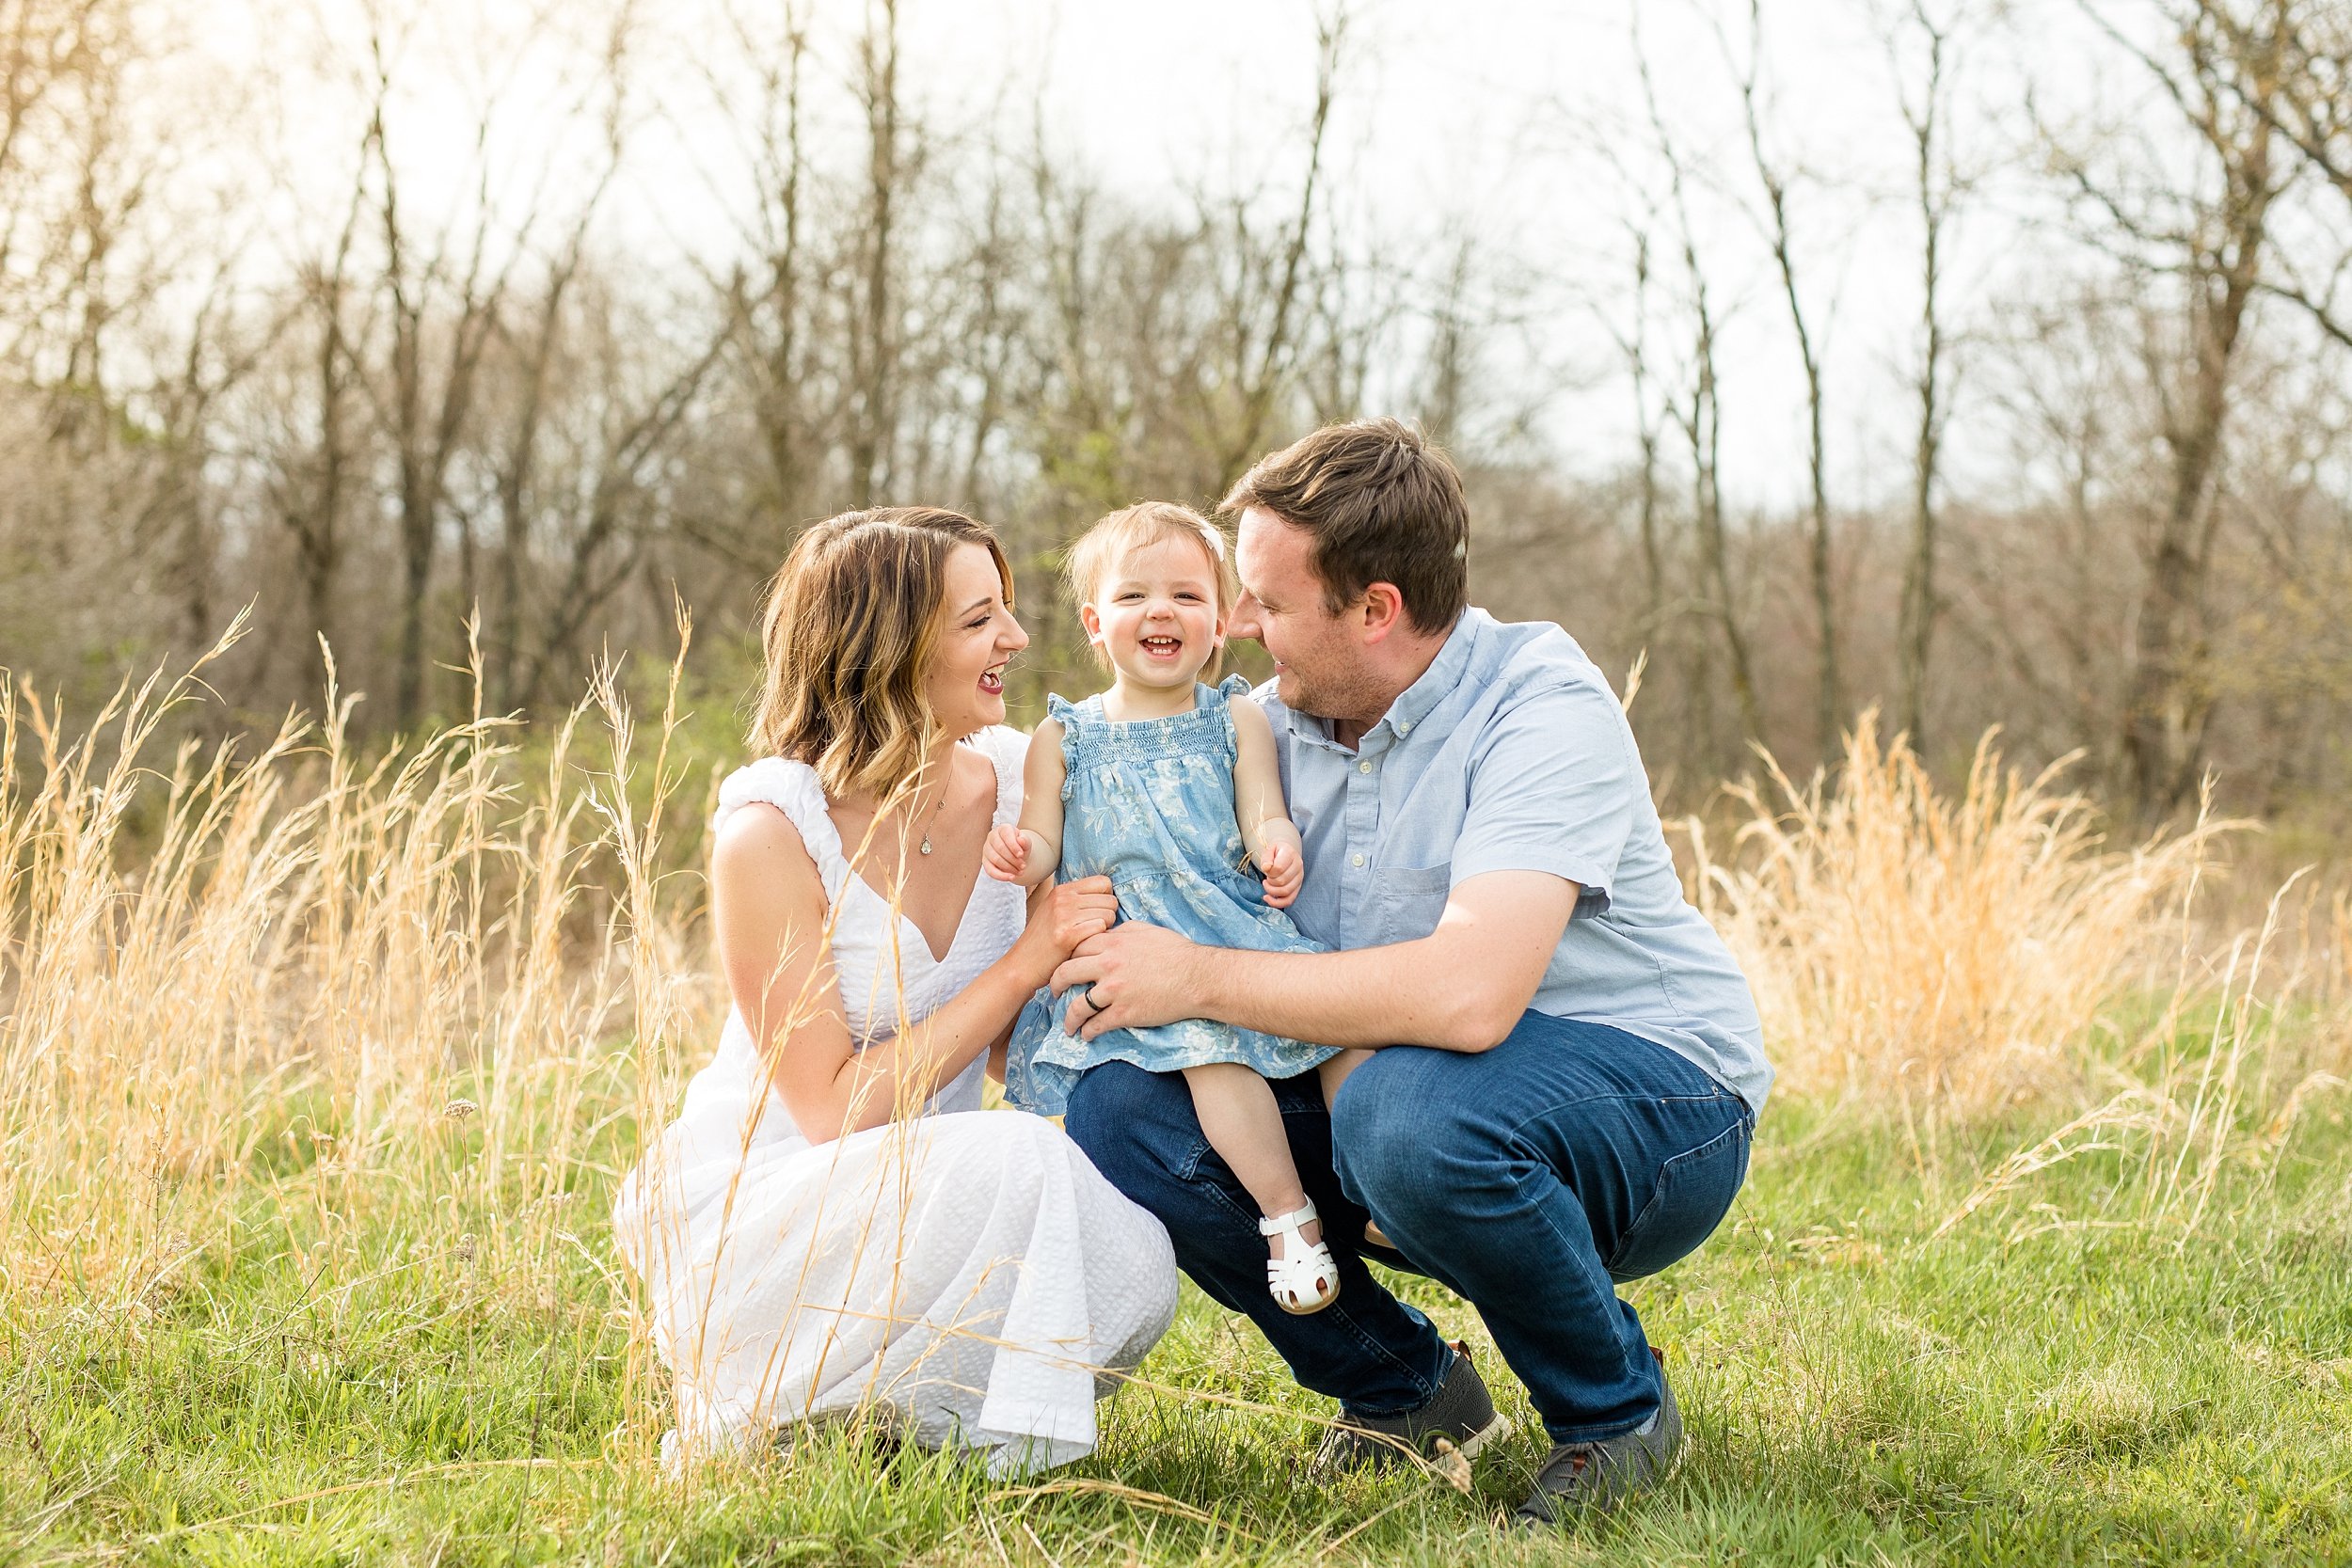 cranberry township family photographer, spring mini sessions pittsburgh, zelienople family photographer, wexford family photographer, pittsburgh family photographer